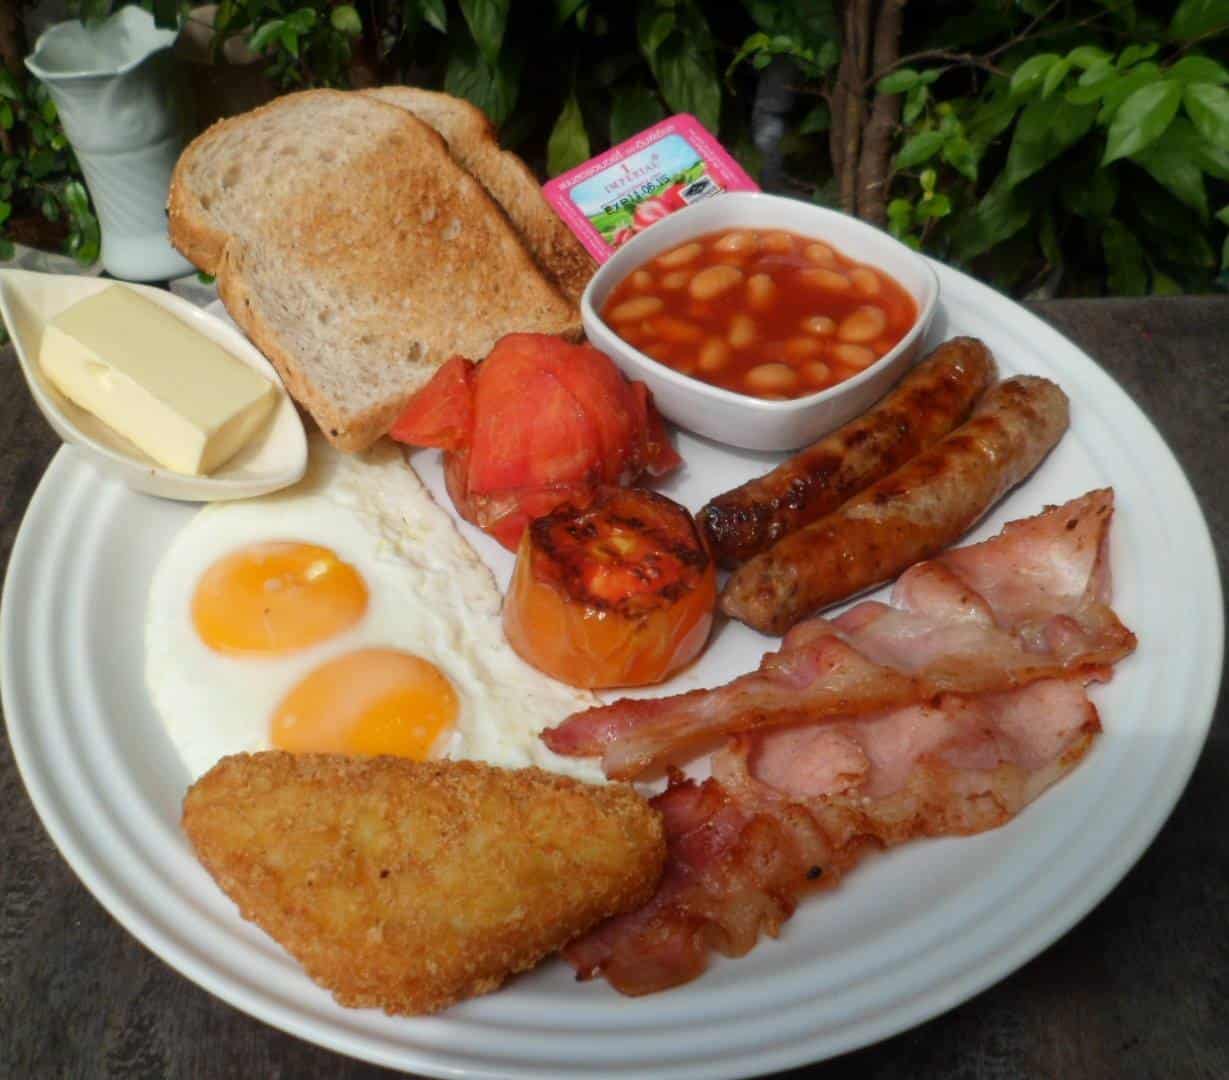 The traditional full English breakfast